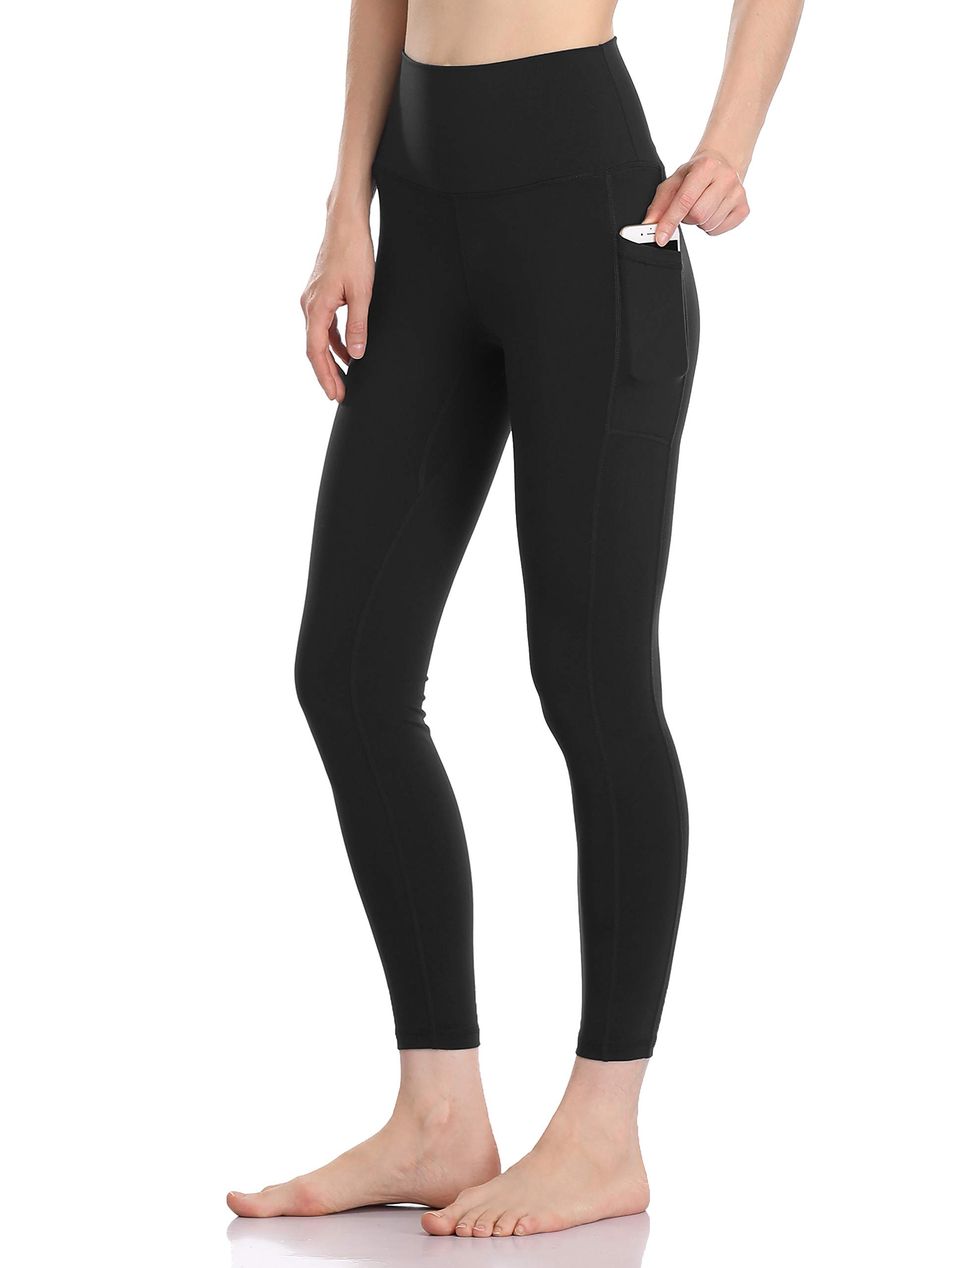 Leggings With Pockets for Women, Comfort & Style in One Package